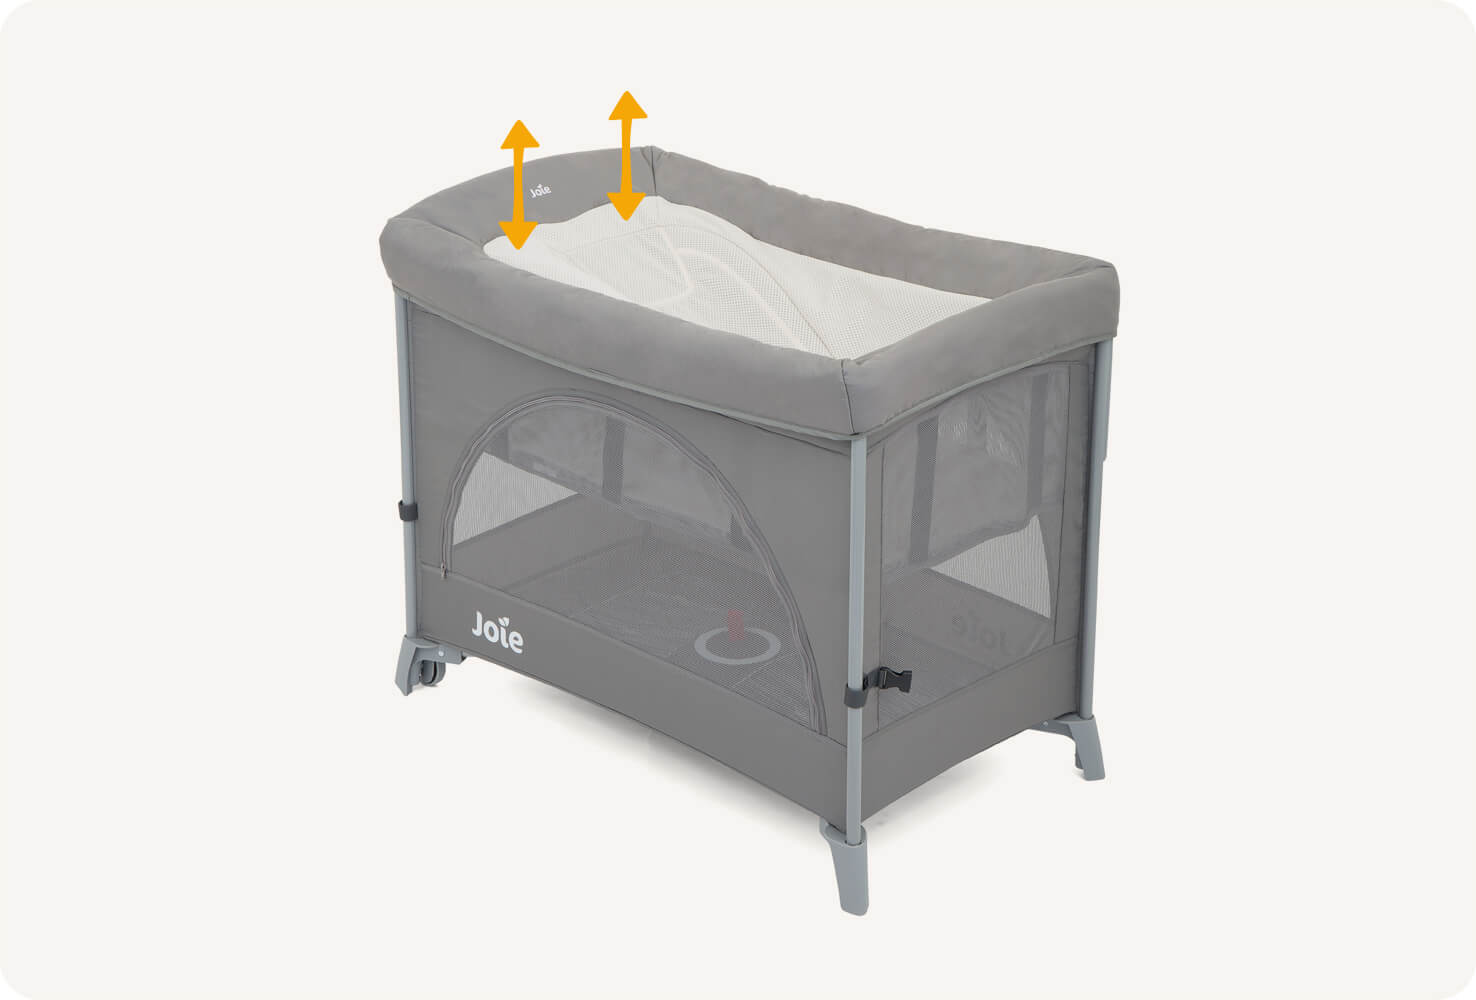 A gray and cream colored Joie Daydreamer napping seat attached to a Kubbie travel cot sitting at an angle facing right, with two orange arrows pointing up indicating that it removes